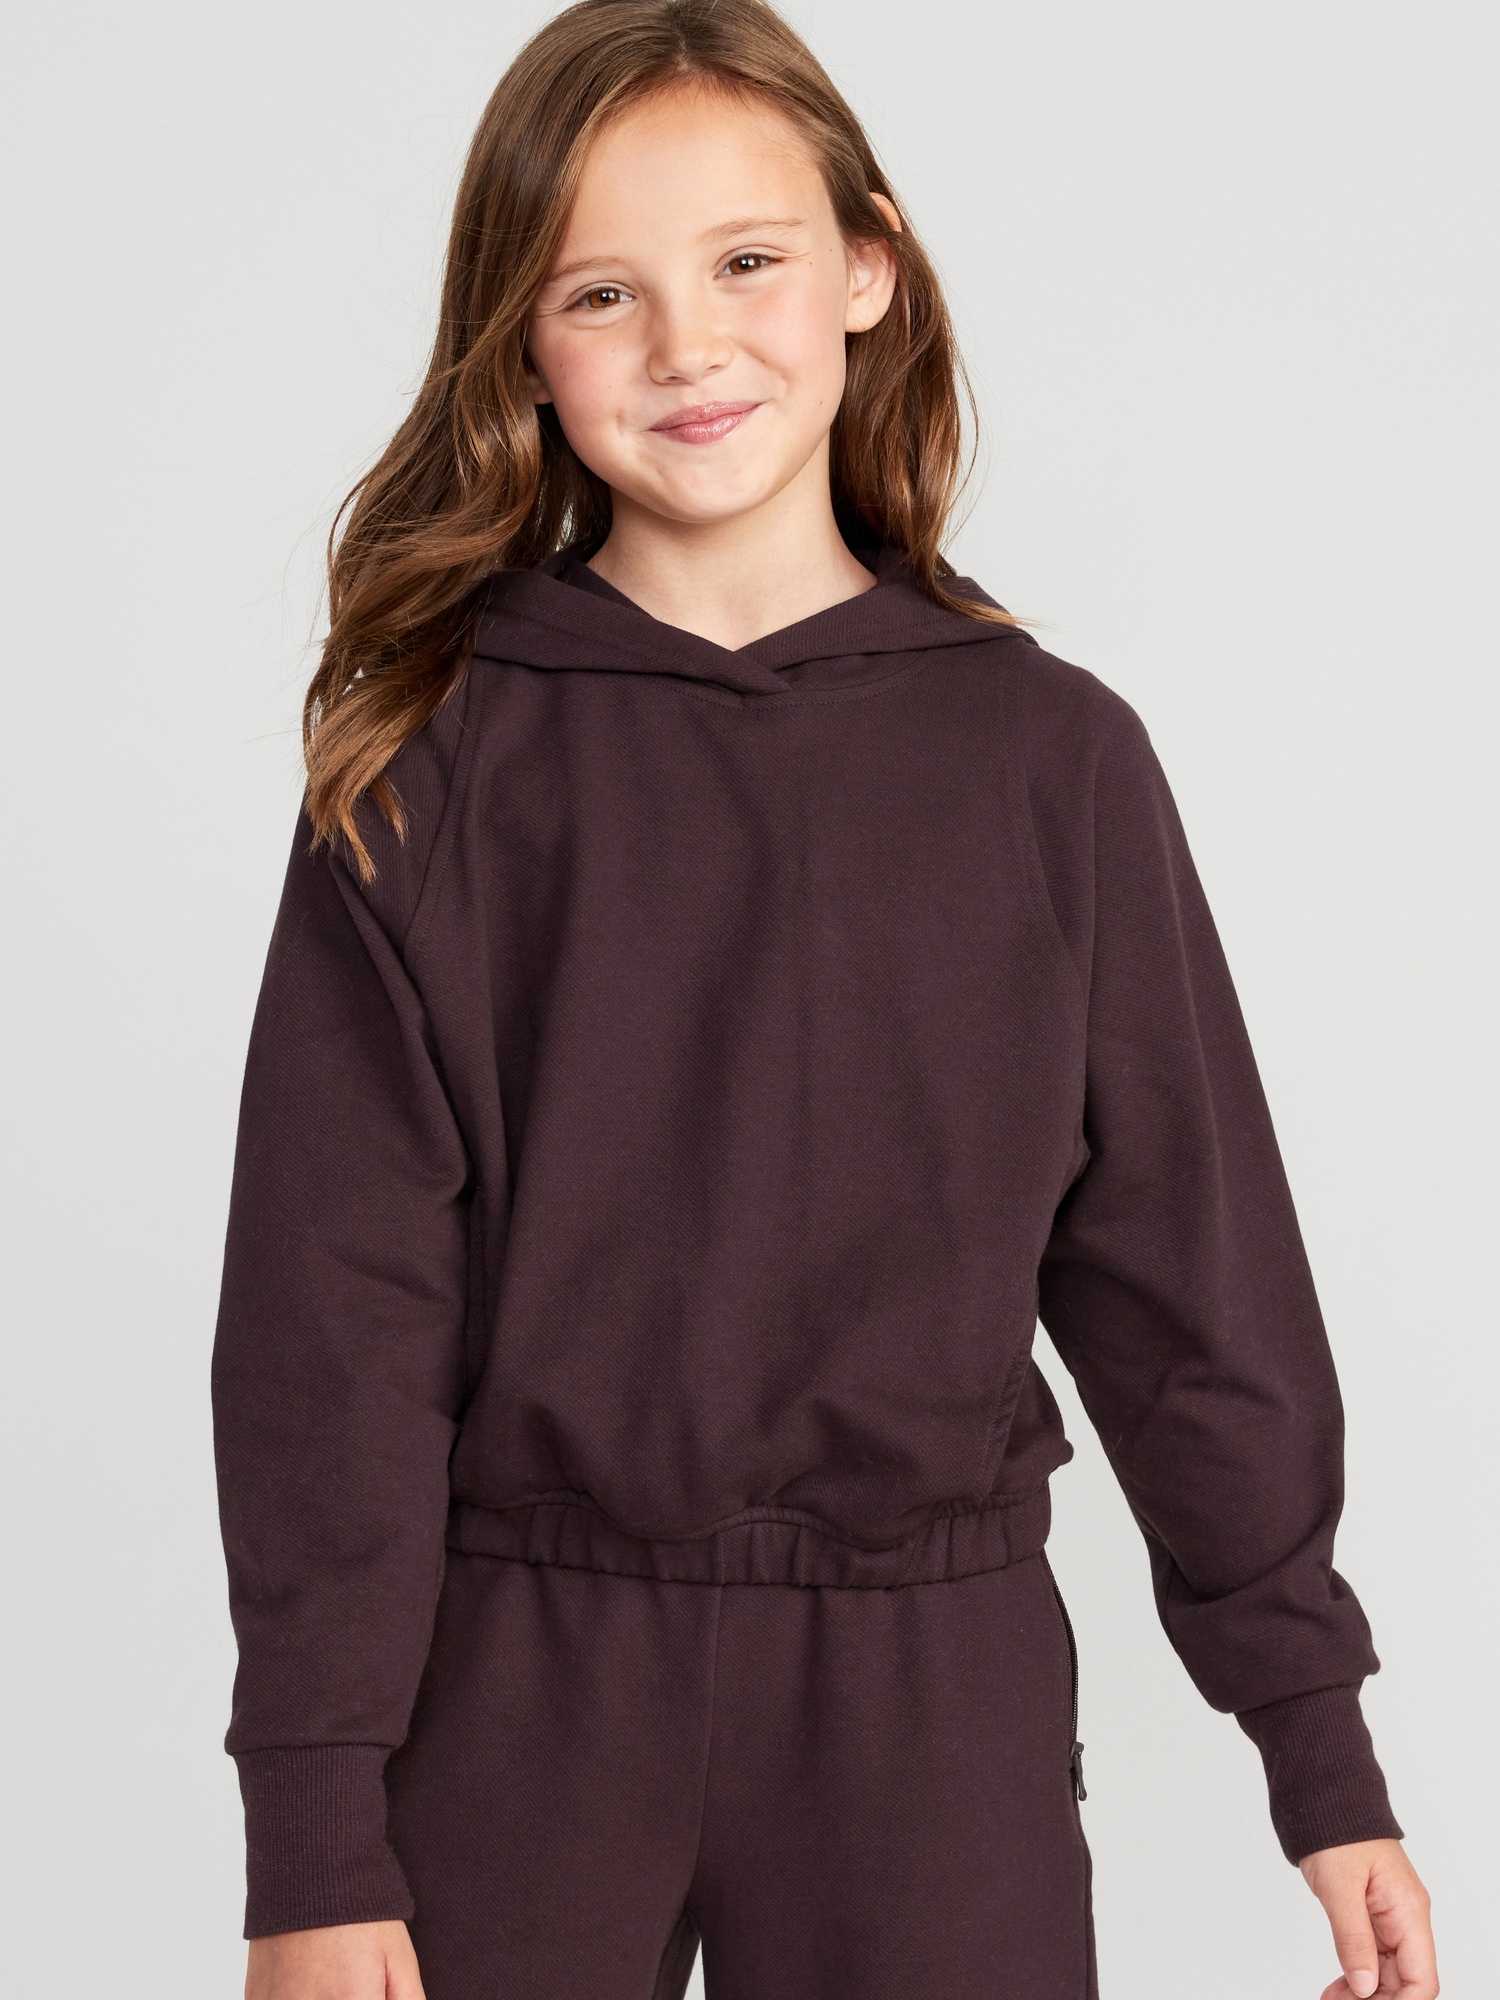 Dynamic Fleece Pullover Performance Hoodie for Girls | Old Navy